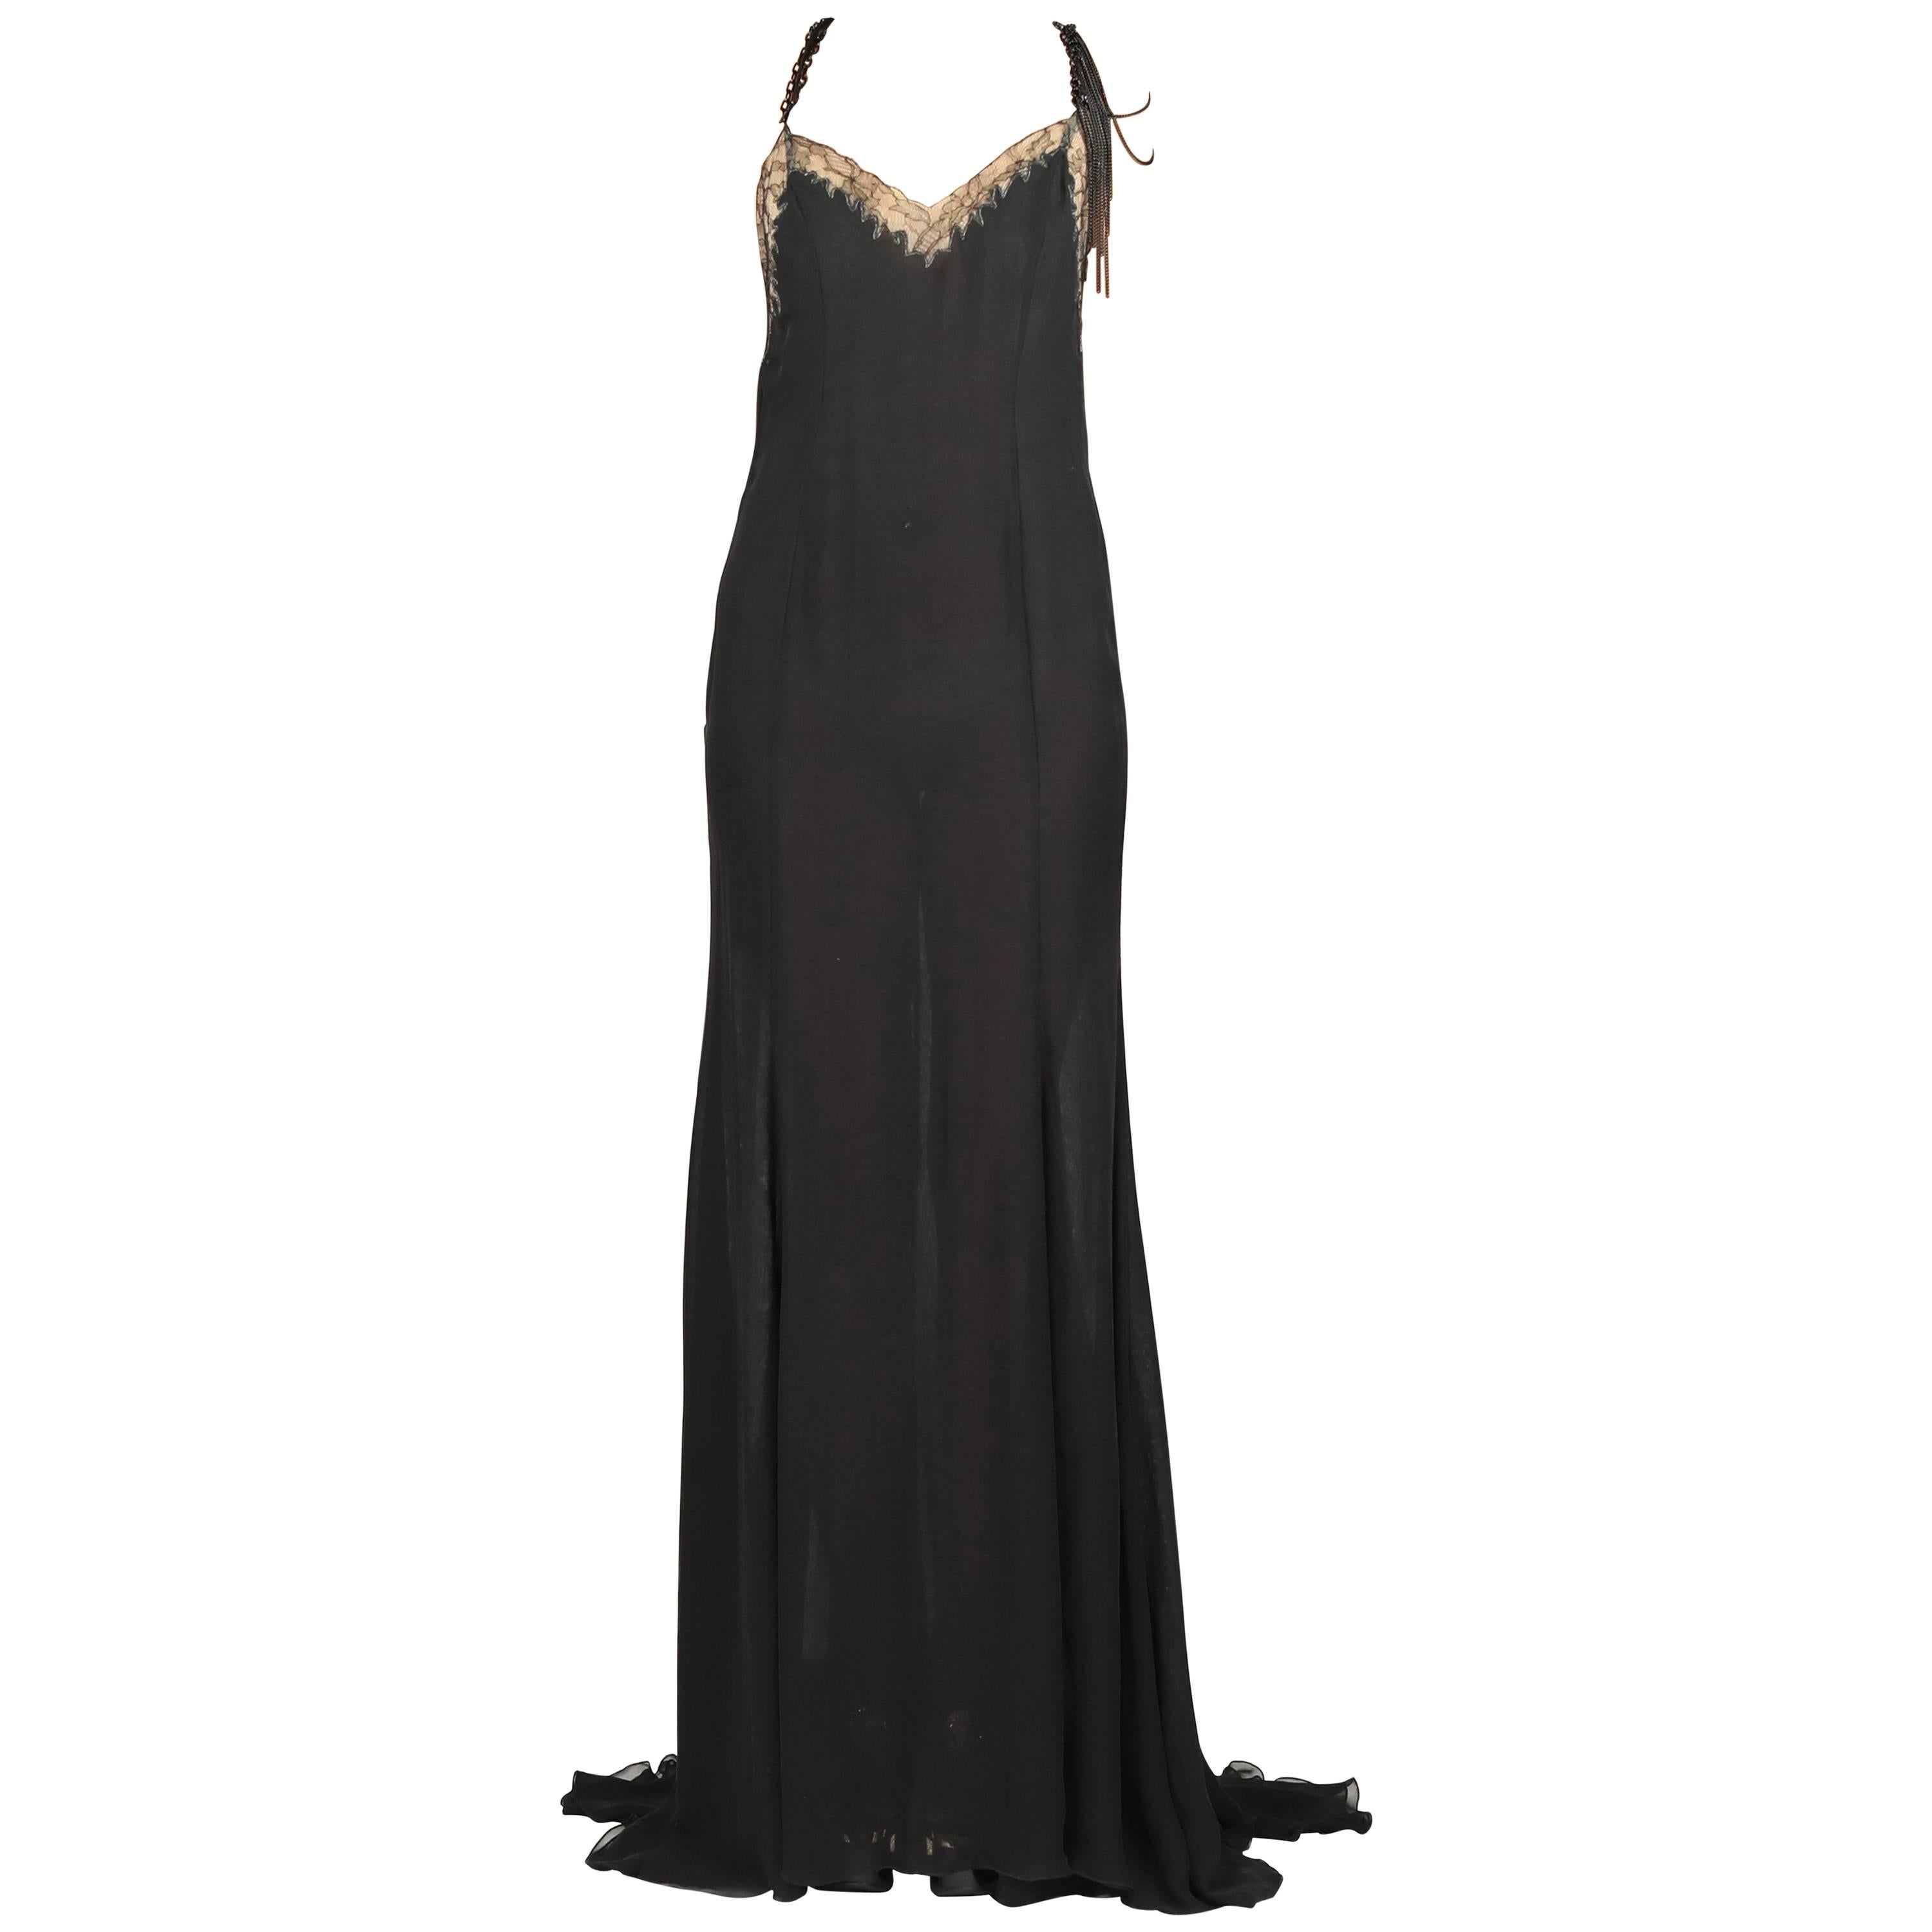 New VERSACE BLACK CHIFFON SILK DRESS GOWN with LACE and CHAINS 